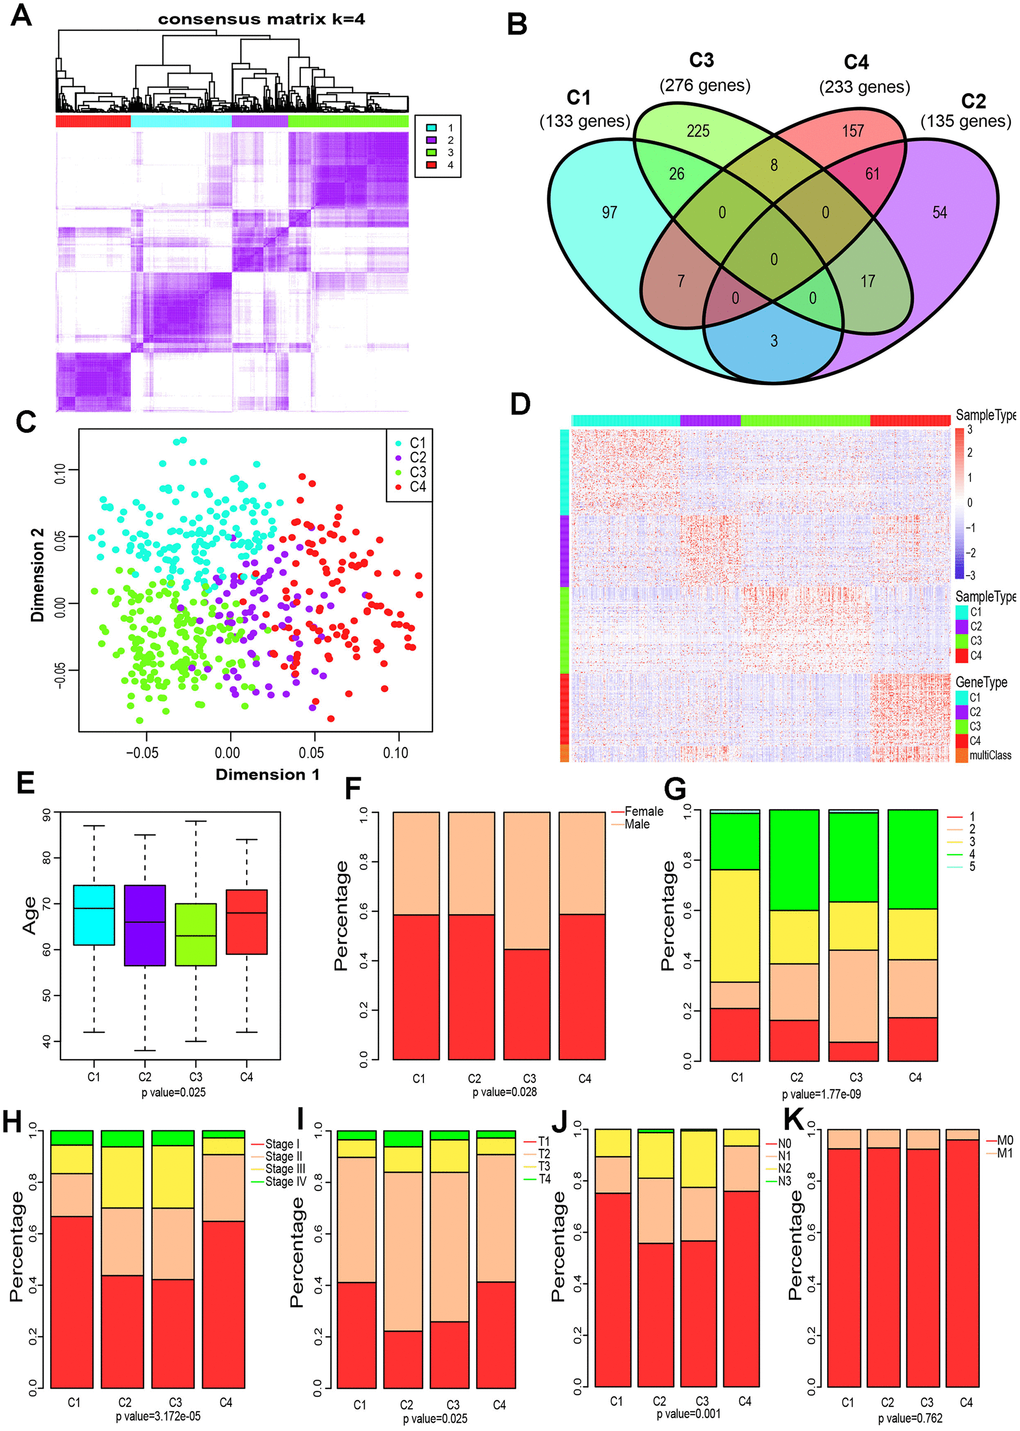 Four immune subtypes of LUAD in TCGA cohort and their clinical profiles. (A) Heatmap of consensus values when k=4. (B) Venn diagram showing the upregulated genes (FDR C) The scatter plot of the top 100 upregulated genes in each cluster, distinguished by the first two principal components (PCs). (D) Gene expression profile of the top 100 upregulated genes in each cluster. Heat maps showing relative gene expression values, red indicates high expression, and blue indicates low expression. (E) Age at diagnosis of the four subtypes (Kruskal-Wallis test). The Boxplot centerlines indicating the median value; box limits show the 25th (Q1) and 75th (Q3) percentiles, lower and upper whiskers extend 1.5 times the interquartile range (IQR) from Q1 and Q3, respectively. (F) Distribution of gender among the four subtypes (chi-square test). (G) Distribution of smoking status across the four subtypes (chi-square test). (H) Distribution of stage at diagnosis in the four subtypes (chi-square test). (I) The degree of progression of the primary tumor (T) at diagnosis in the four subtypes (chi-square test). (J) The degree of the invasion of regional lymph nodes (N) at diagnosis among the four subtypes (chi-square test). (K) Incidence of metastatic (M) dissemination at diagnosis among the four subtypes (chi-square test).